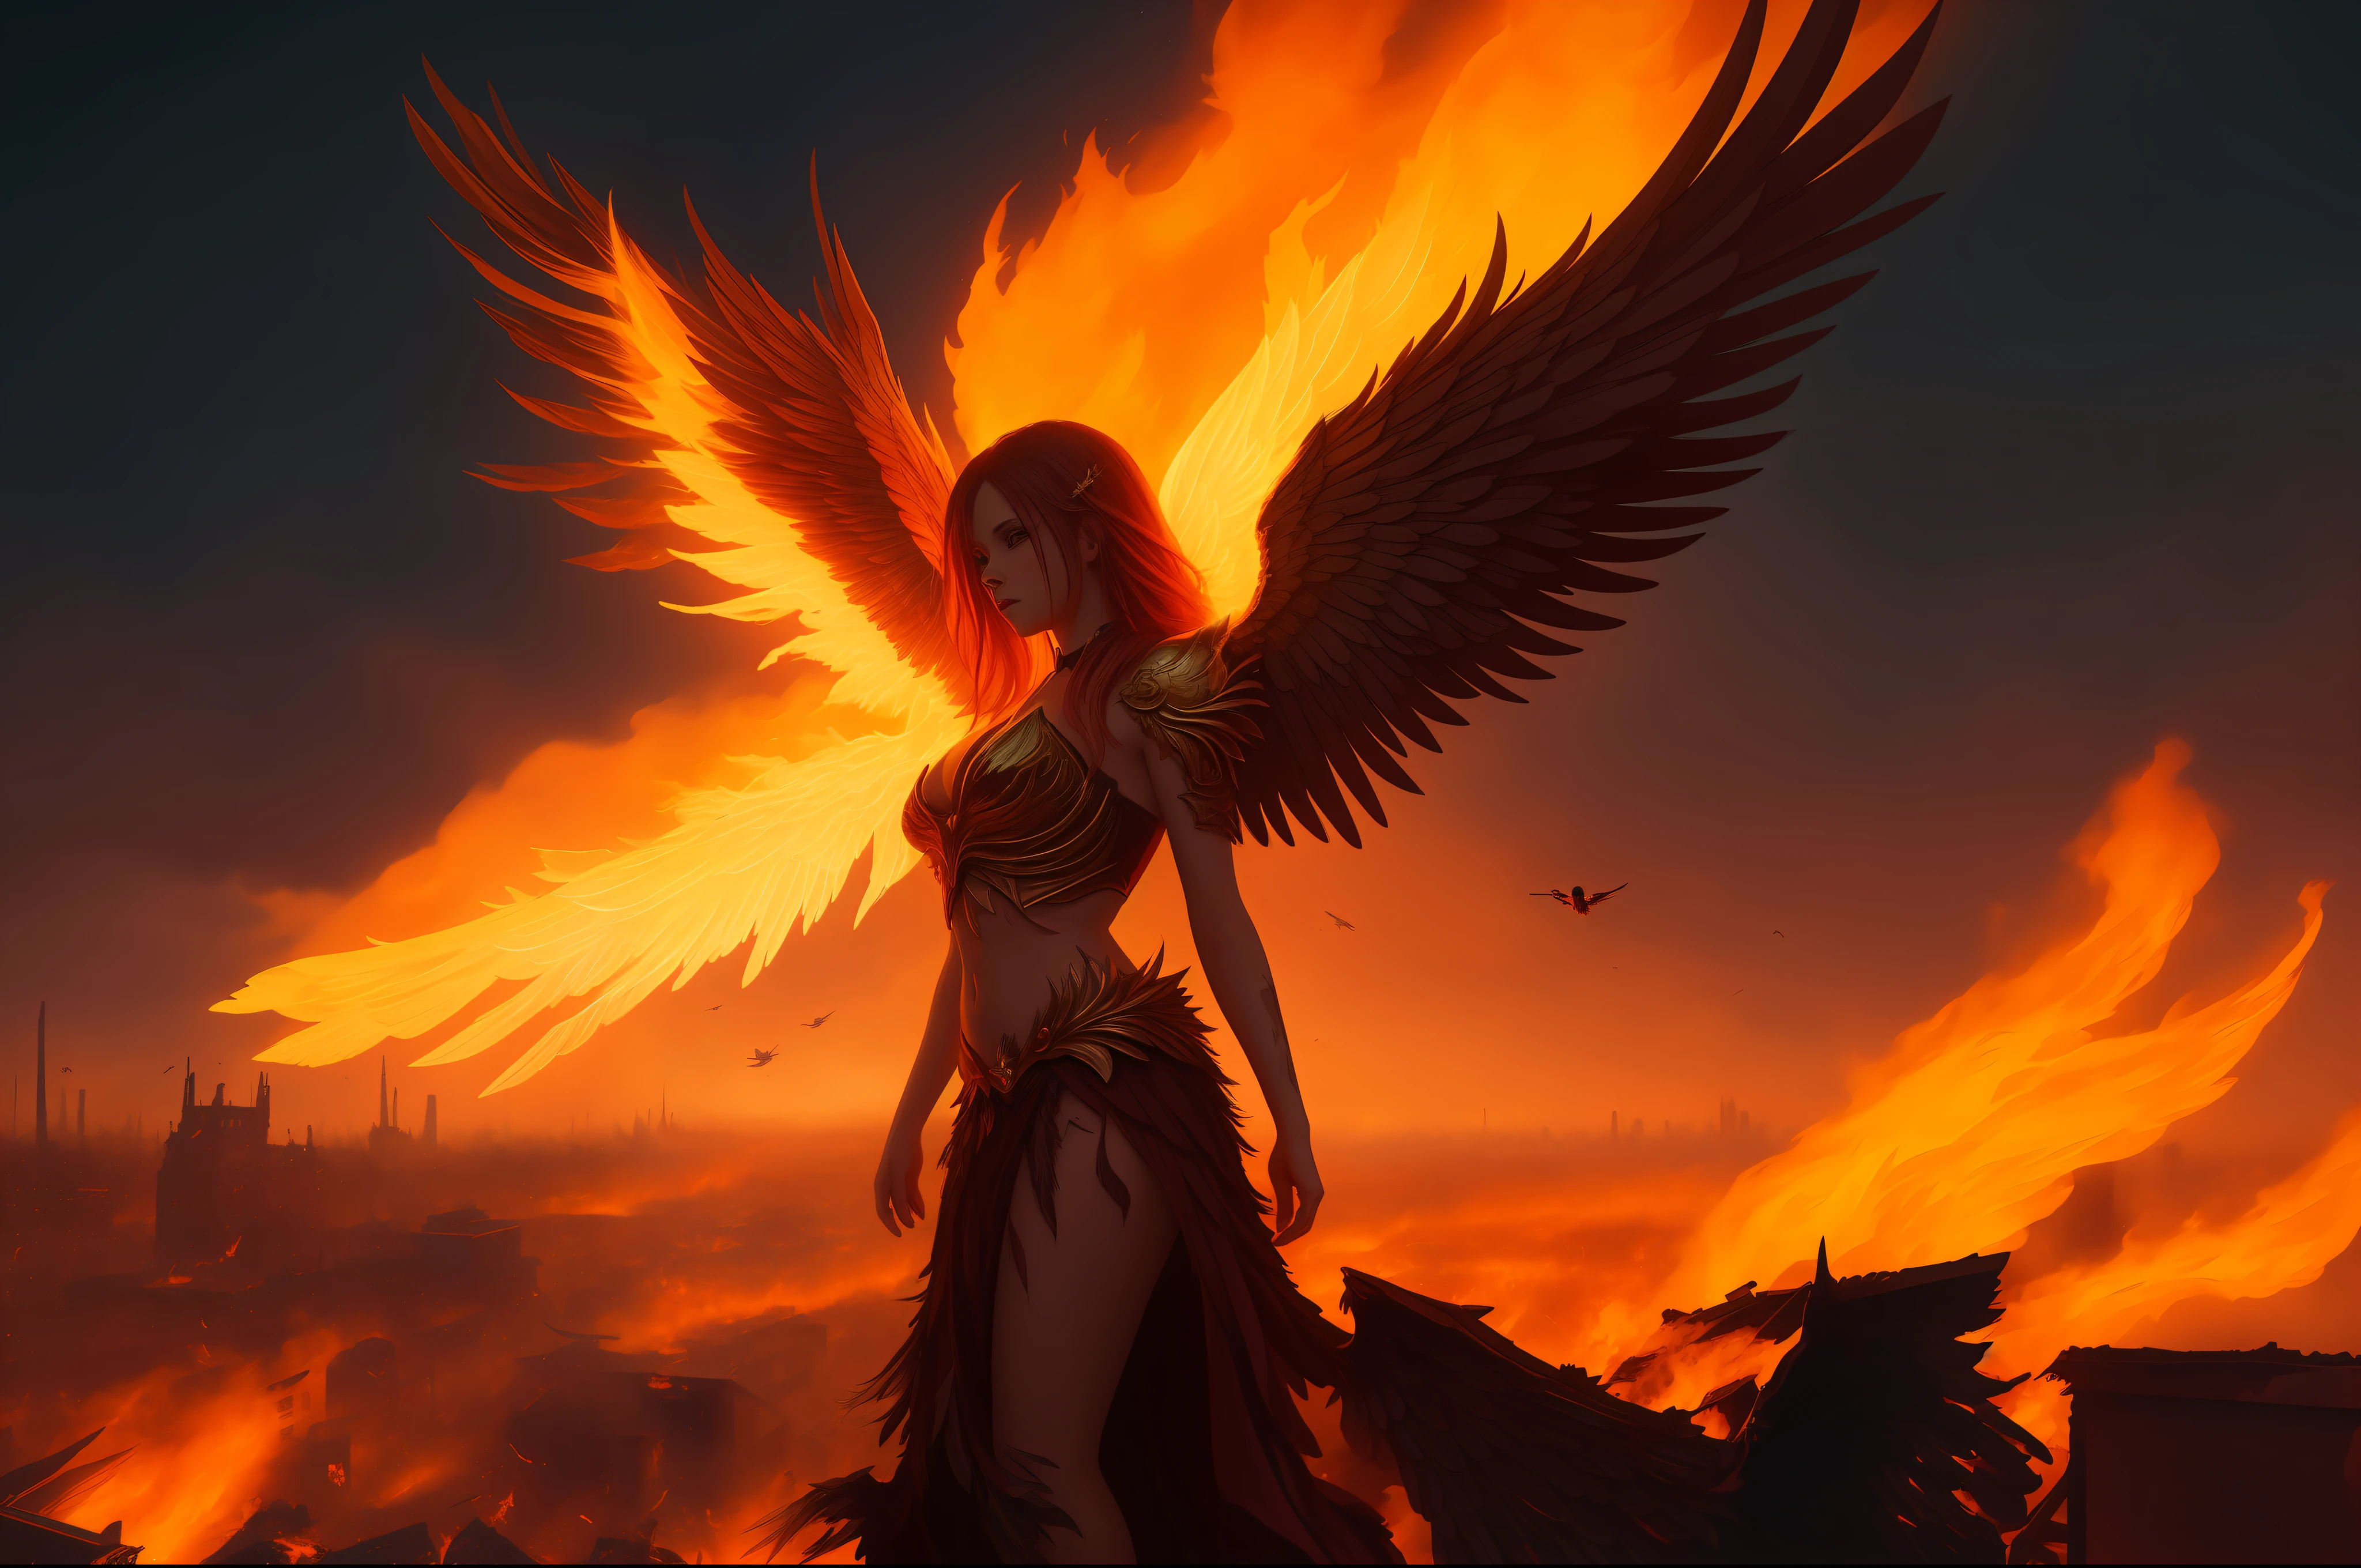 A 4K contrapicado digital painting of an injured evil fallen female angel with large wings surrounded by flames, plumage falling around, amidst crumbling rooftops in a burning apocalyptic city. Use shallow depth of field focused on the angel, cinematic lighting and shadows, in high resolution details.